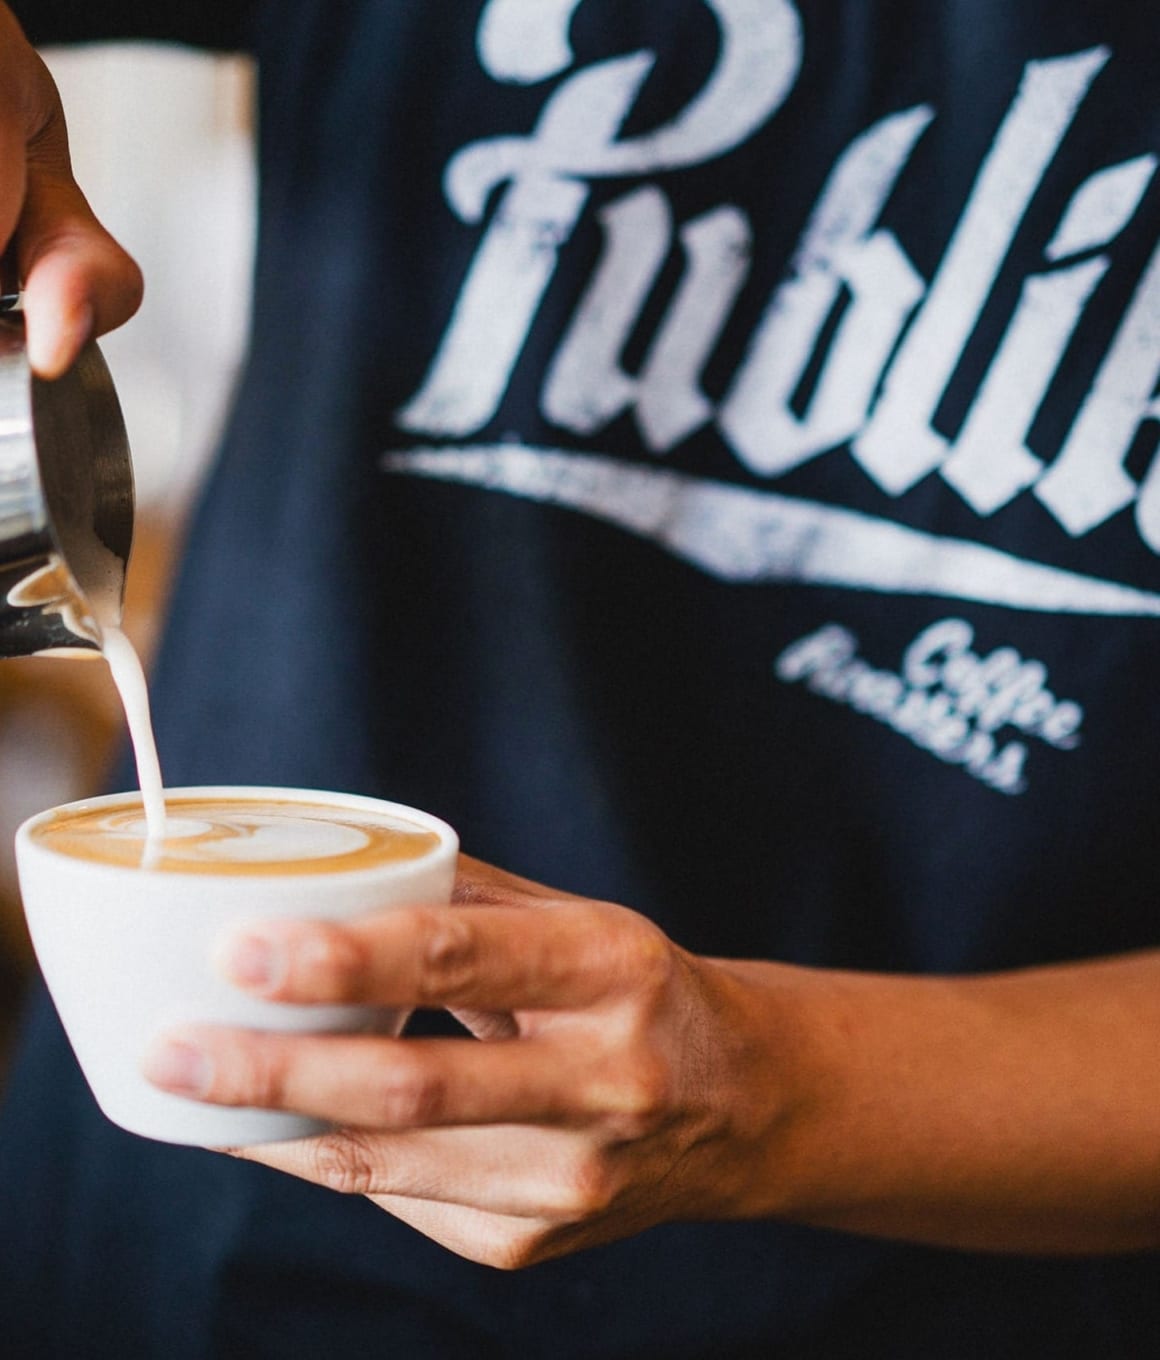 A latte being poured at Publik near Avia apartments